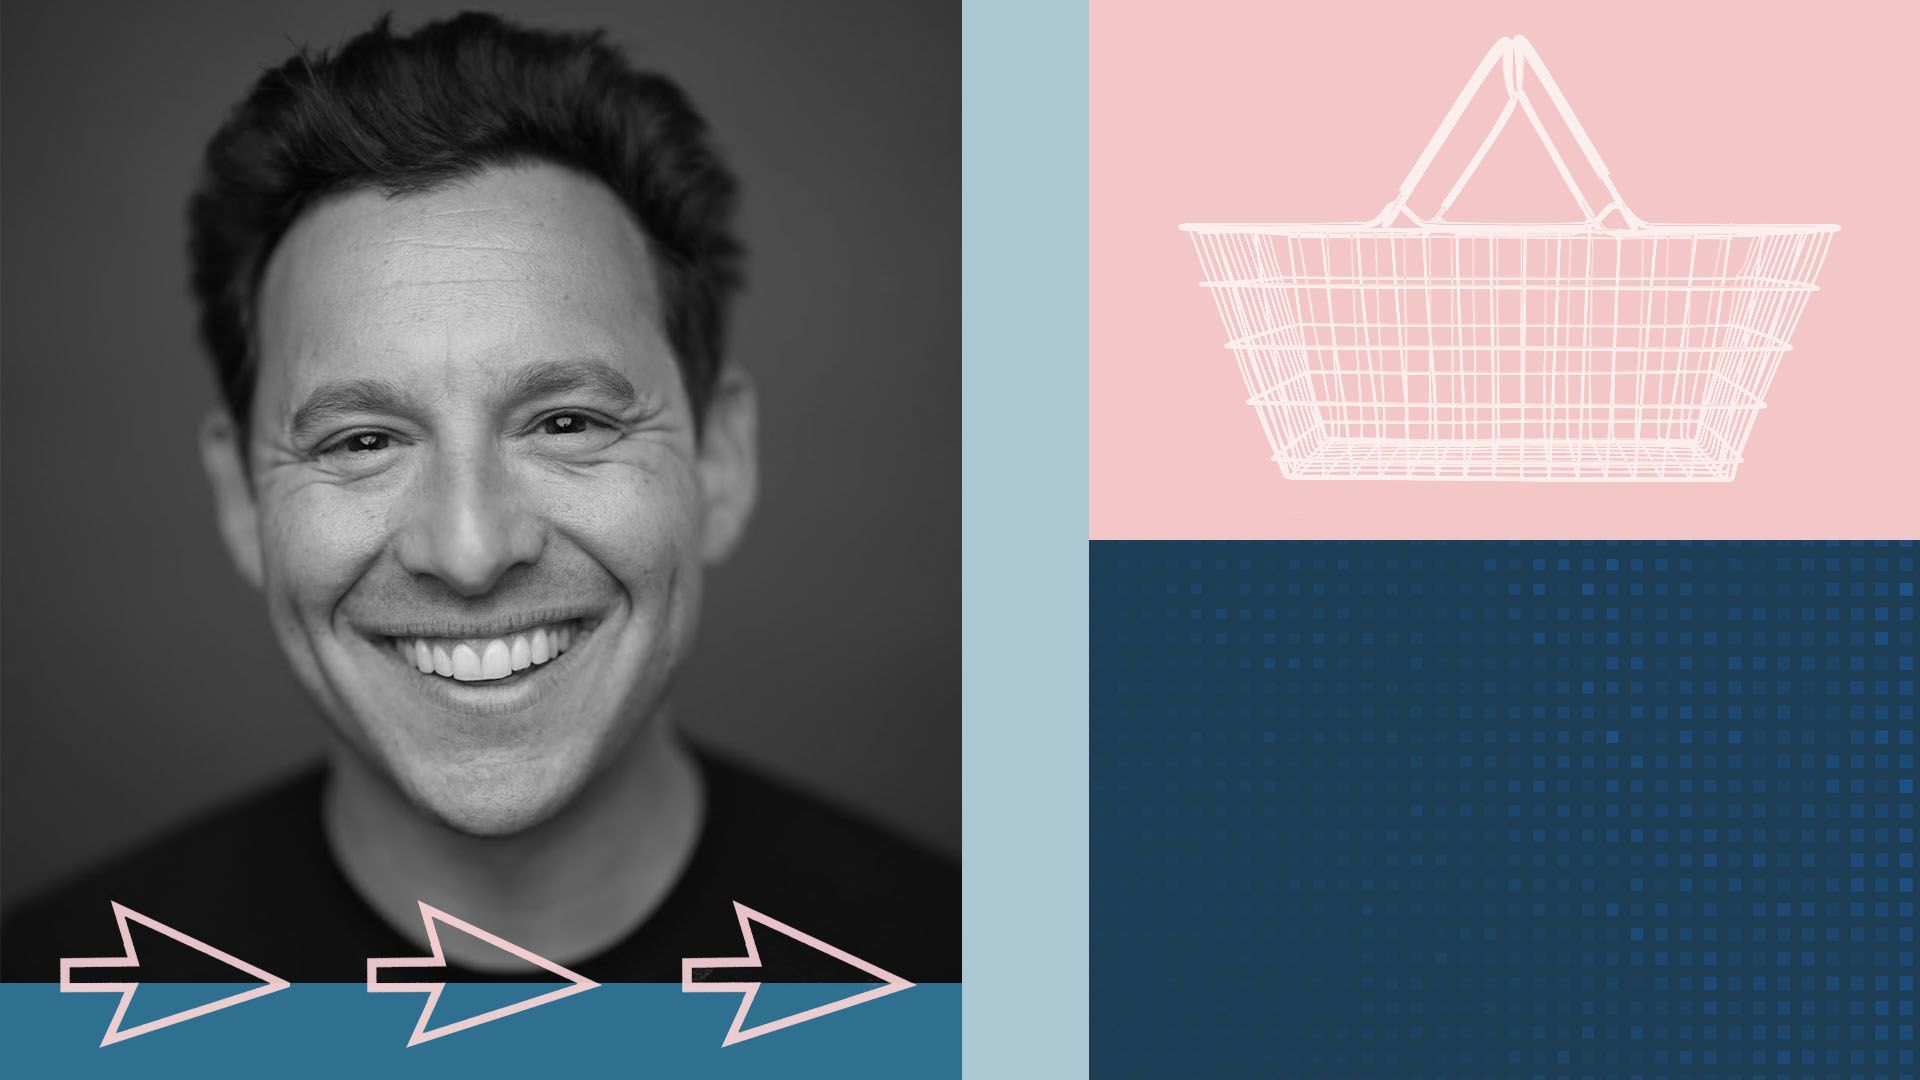 Photo illustration of Shopify president Harley finkelstein with cursors and a shopping basket overlaid